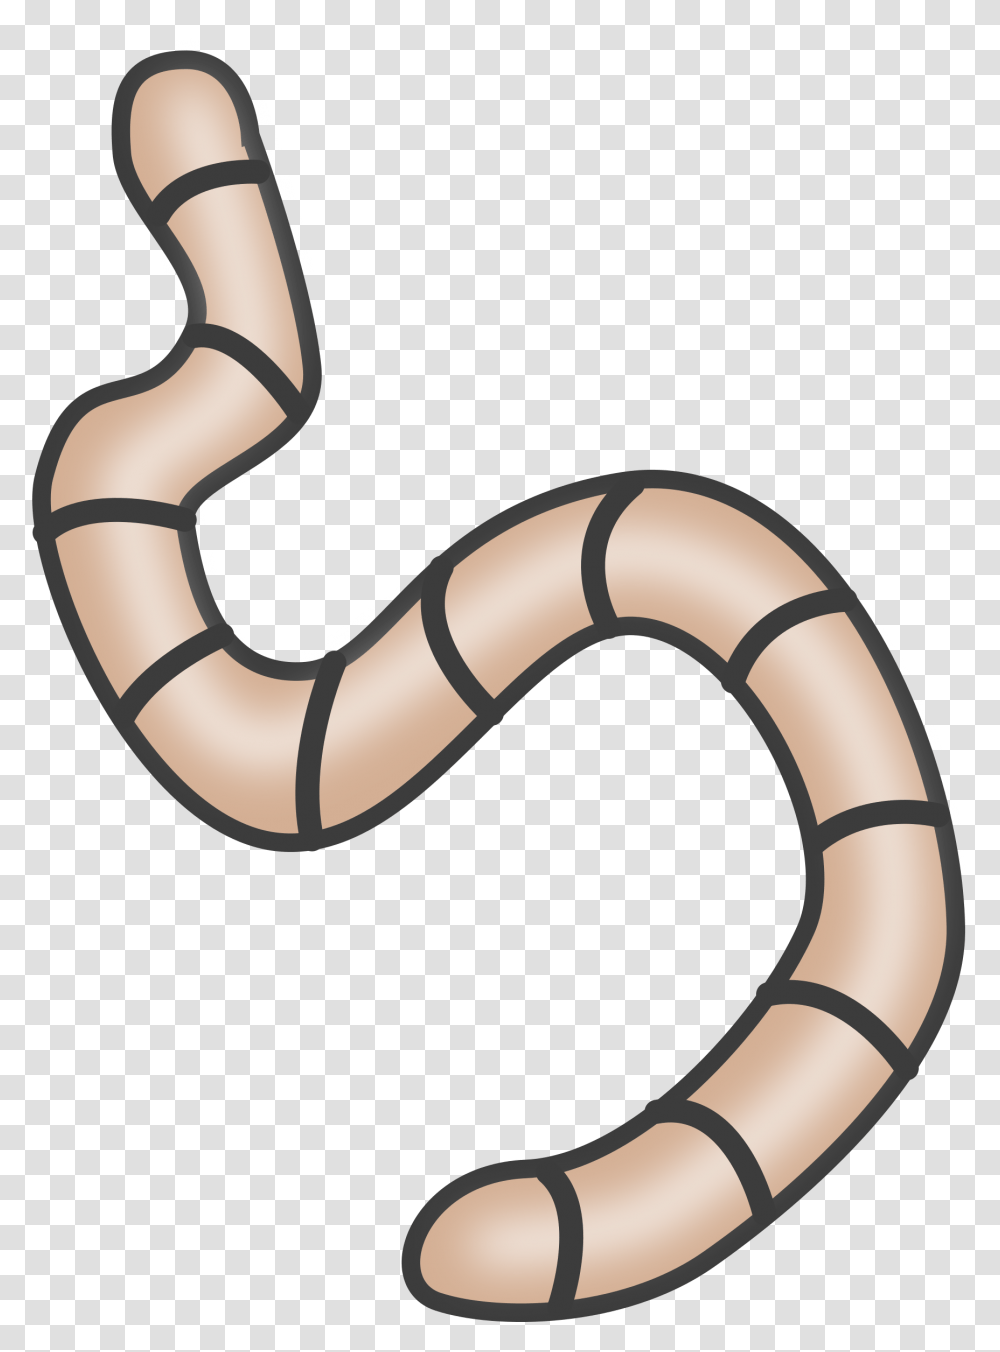 Worm Animal Biology Background Worm Clipart, Invertebrate, Stomach Transparent Png